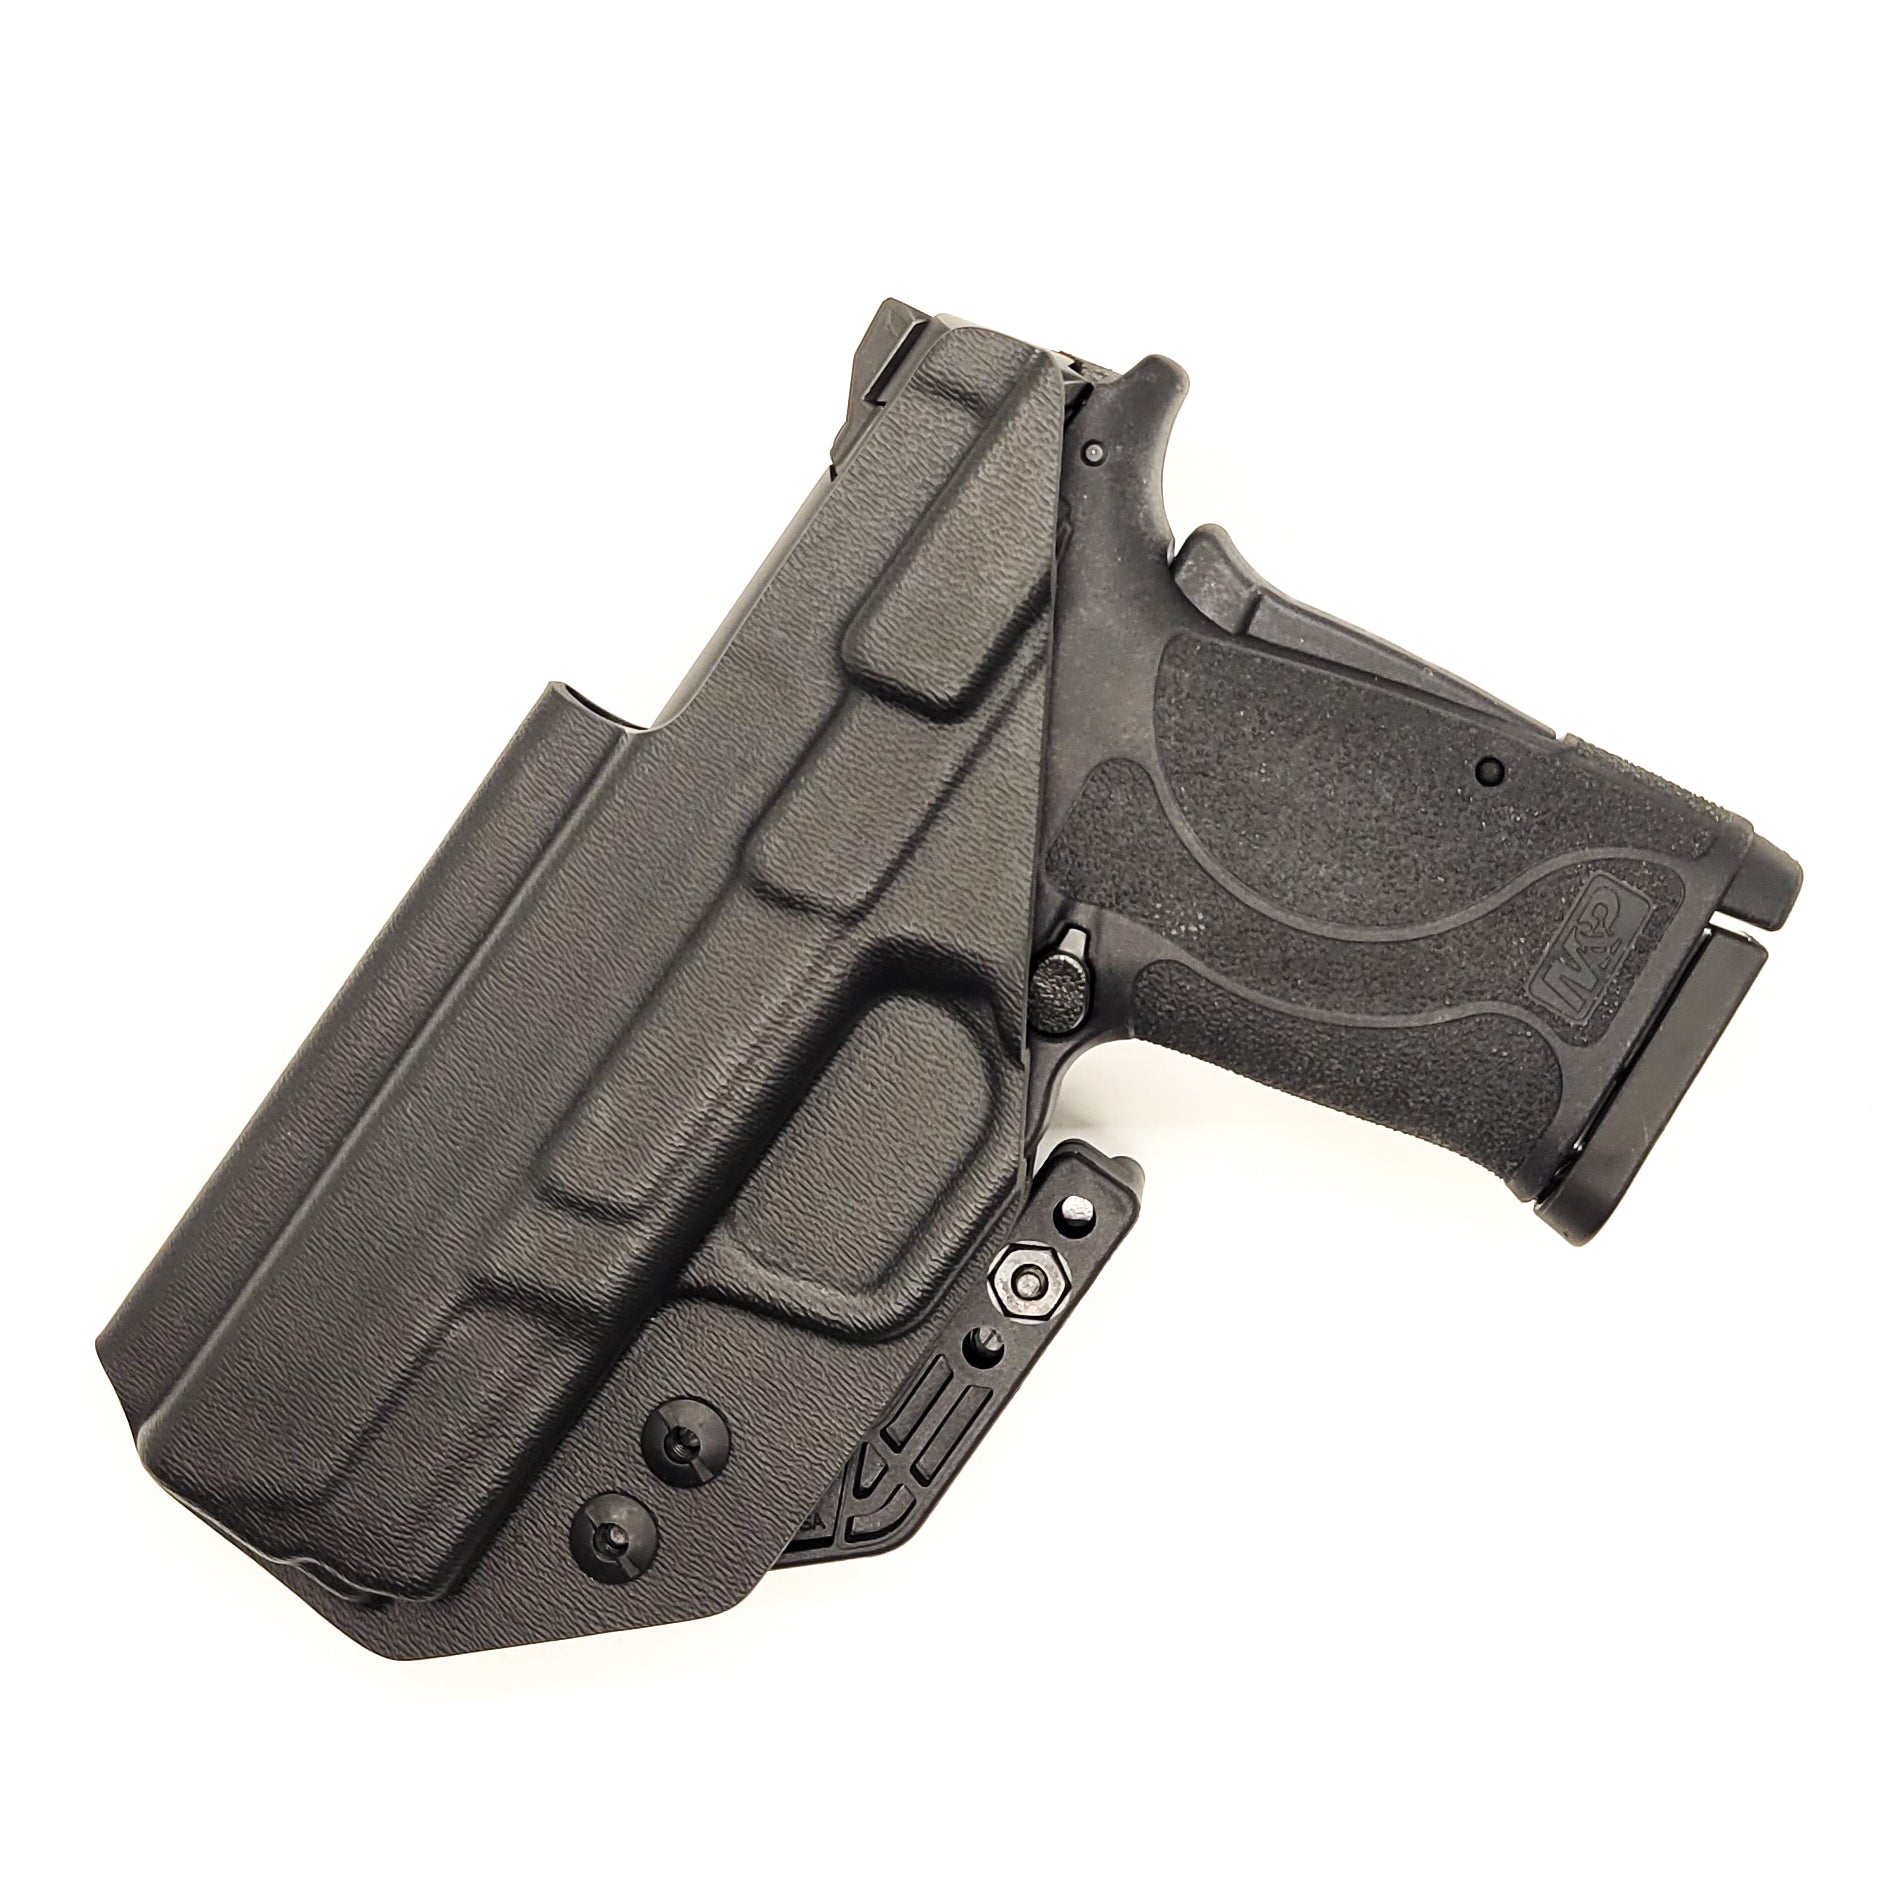 For 2022 best Inside Waistband IWB AIWB Kydex Holster designed to fit the Smith & Wesson M&P 9 Shield EZ handgun, shop Four Brothers Holsters.  Full sweat guard, adjustable retention, minimal material, and smooth edges to reduce printing. Profiled to clear red dot sights and optics. Proudly made in the USA. 